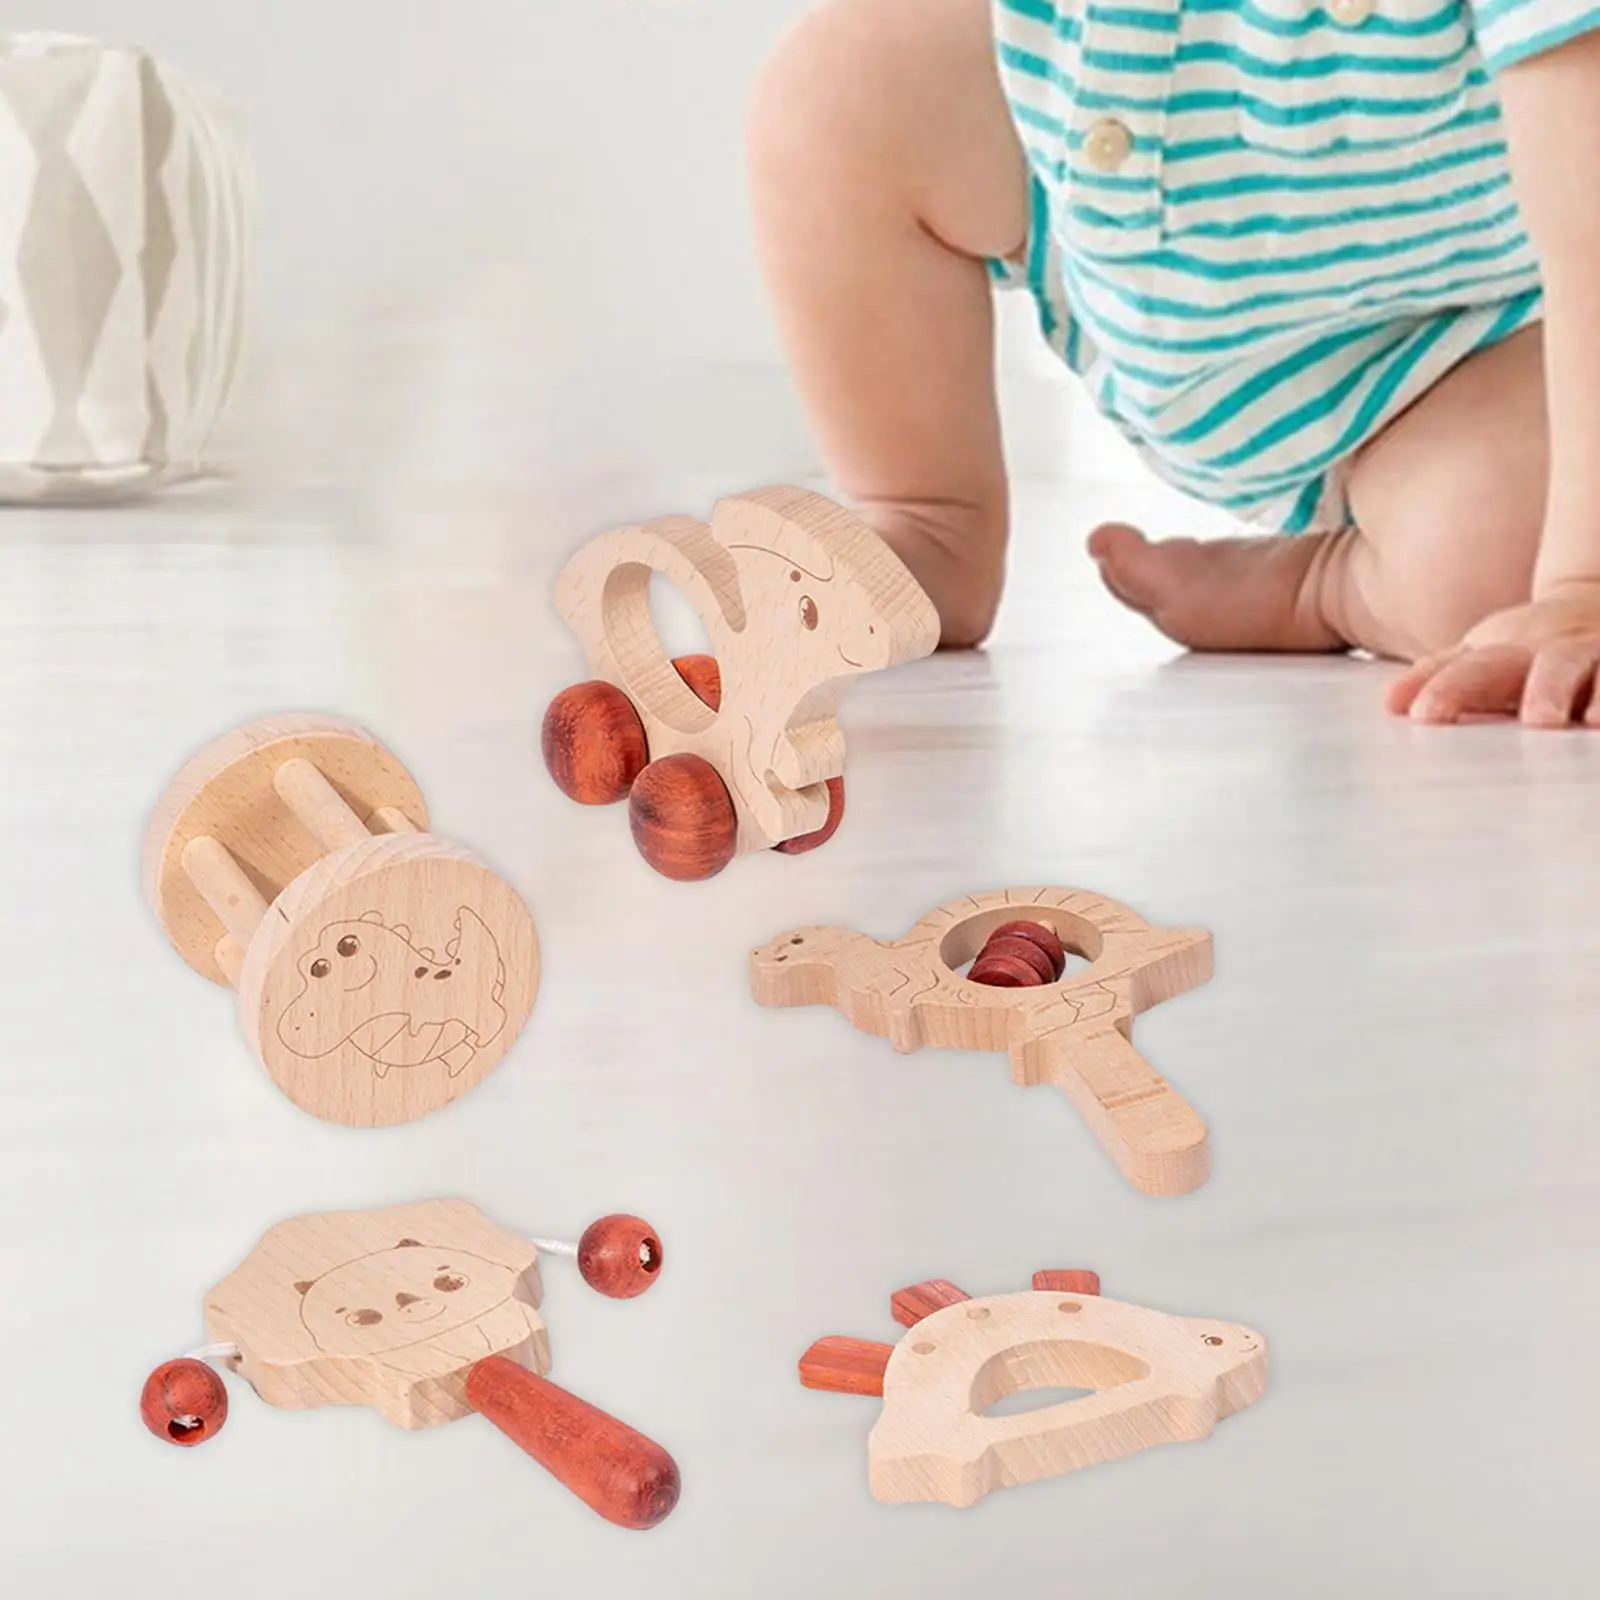 

5 Pieces Wooden Baby Toys Wood Car Sensory Development Wood Toy Rattles Montessori Baby Rattle with Bells 6-12 Months